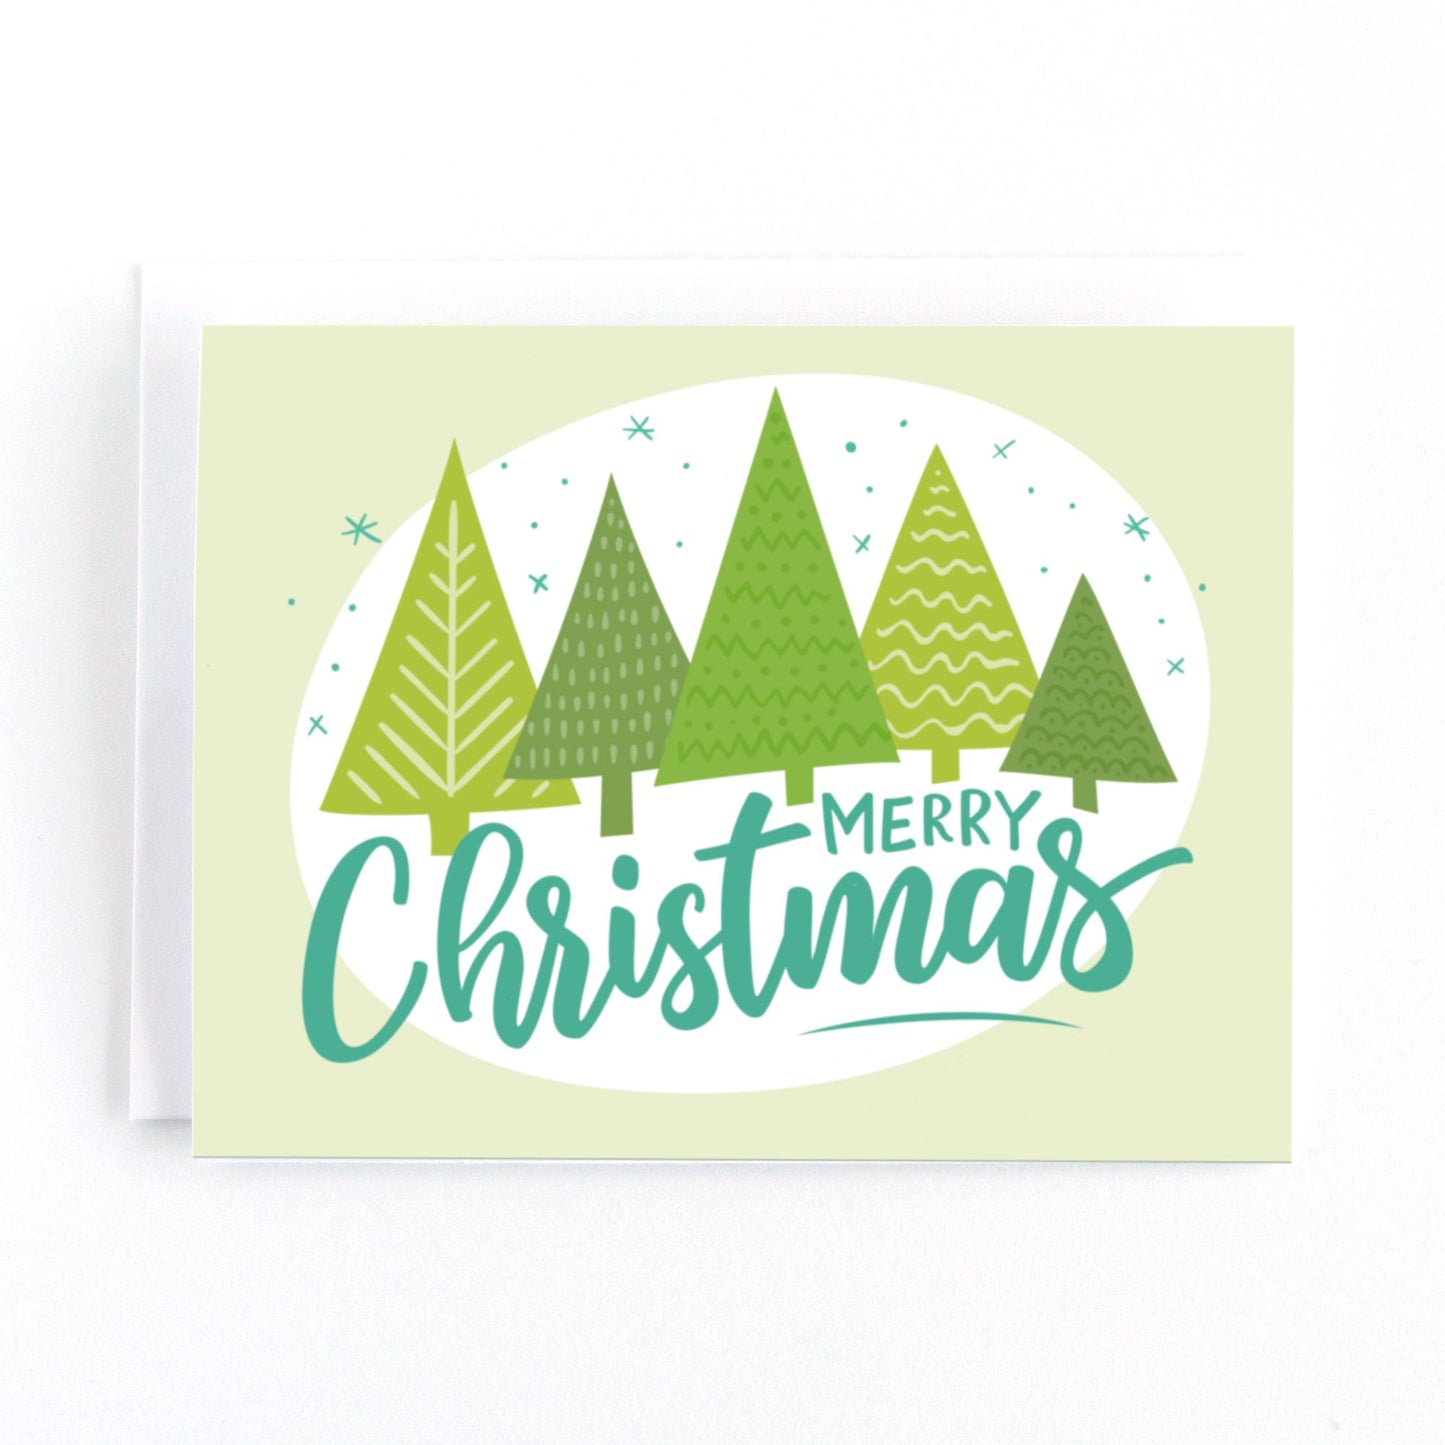 Christmas card featuring modern stylized christmas trees and the hand lettered greeting, Merry christmas